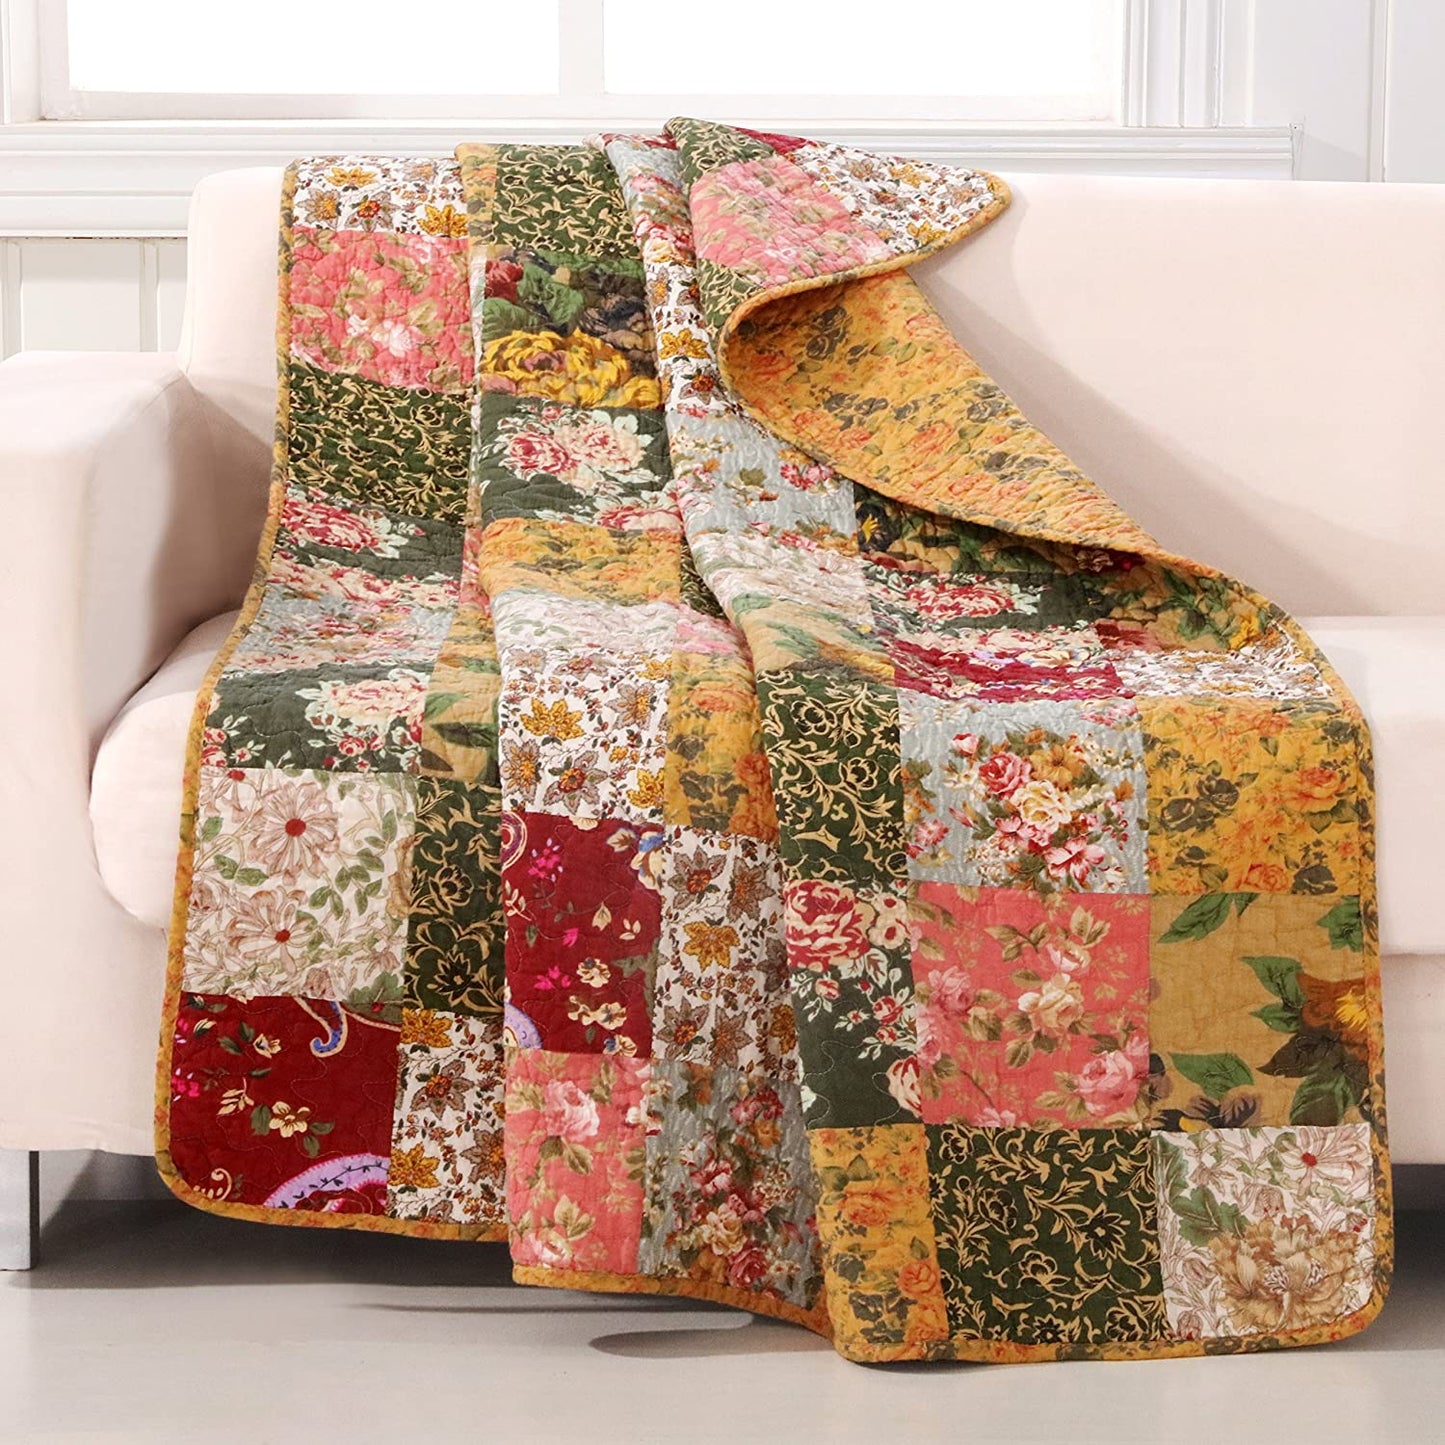 WONGS BEDDING  Multicolor Antique Chic Quilted Patchwork Throw Blanket